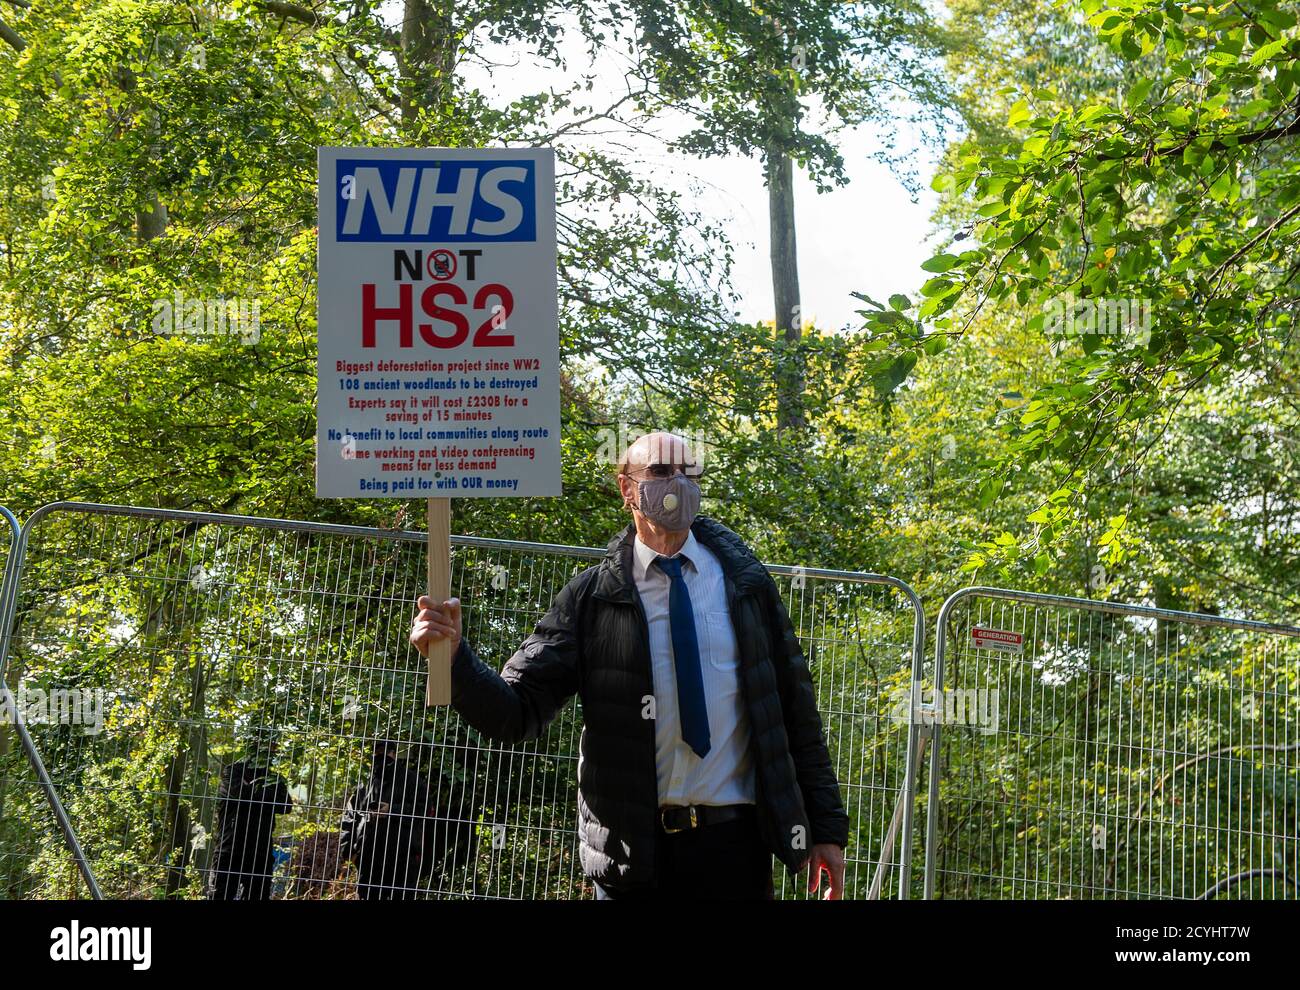 Wendover, UK. 1st October, 2020. A protester holds up an NHS not HS2 sign in the woods. Peaceful tree protectors and environmental campaigners at the Stop HS2 Jones Hill Protection Camp were being evicted today from their homes in the trees by the National Eviction Team Enforcement Agents working on behalf of HS2 Ltd. The over budget and controversial HS2 High Speed Rail link from London to Birmingham project puts 108 ancient woodlands, 693 wildlife sites and 33 SSSIs at risk of damage or destruction. Credit: Maureen McLean/Alamy Stock Photo